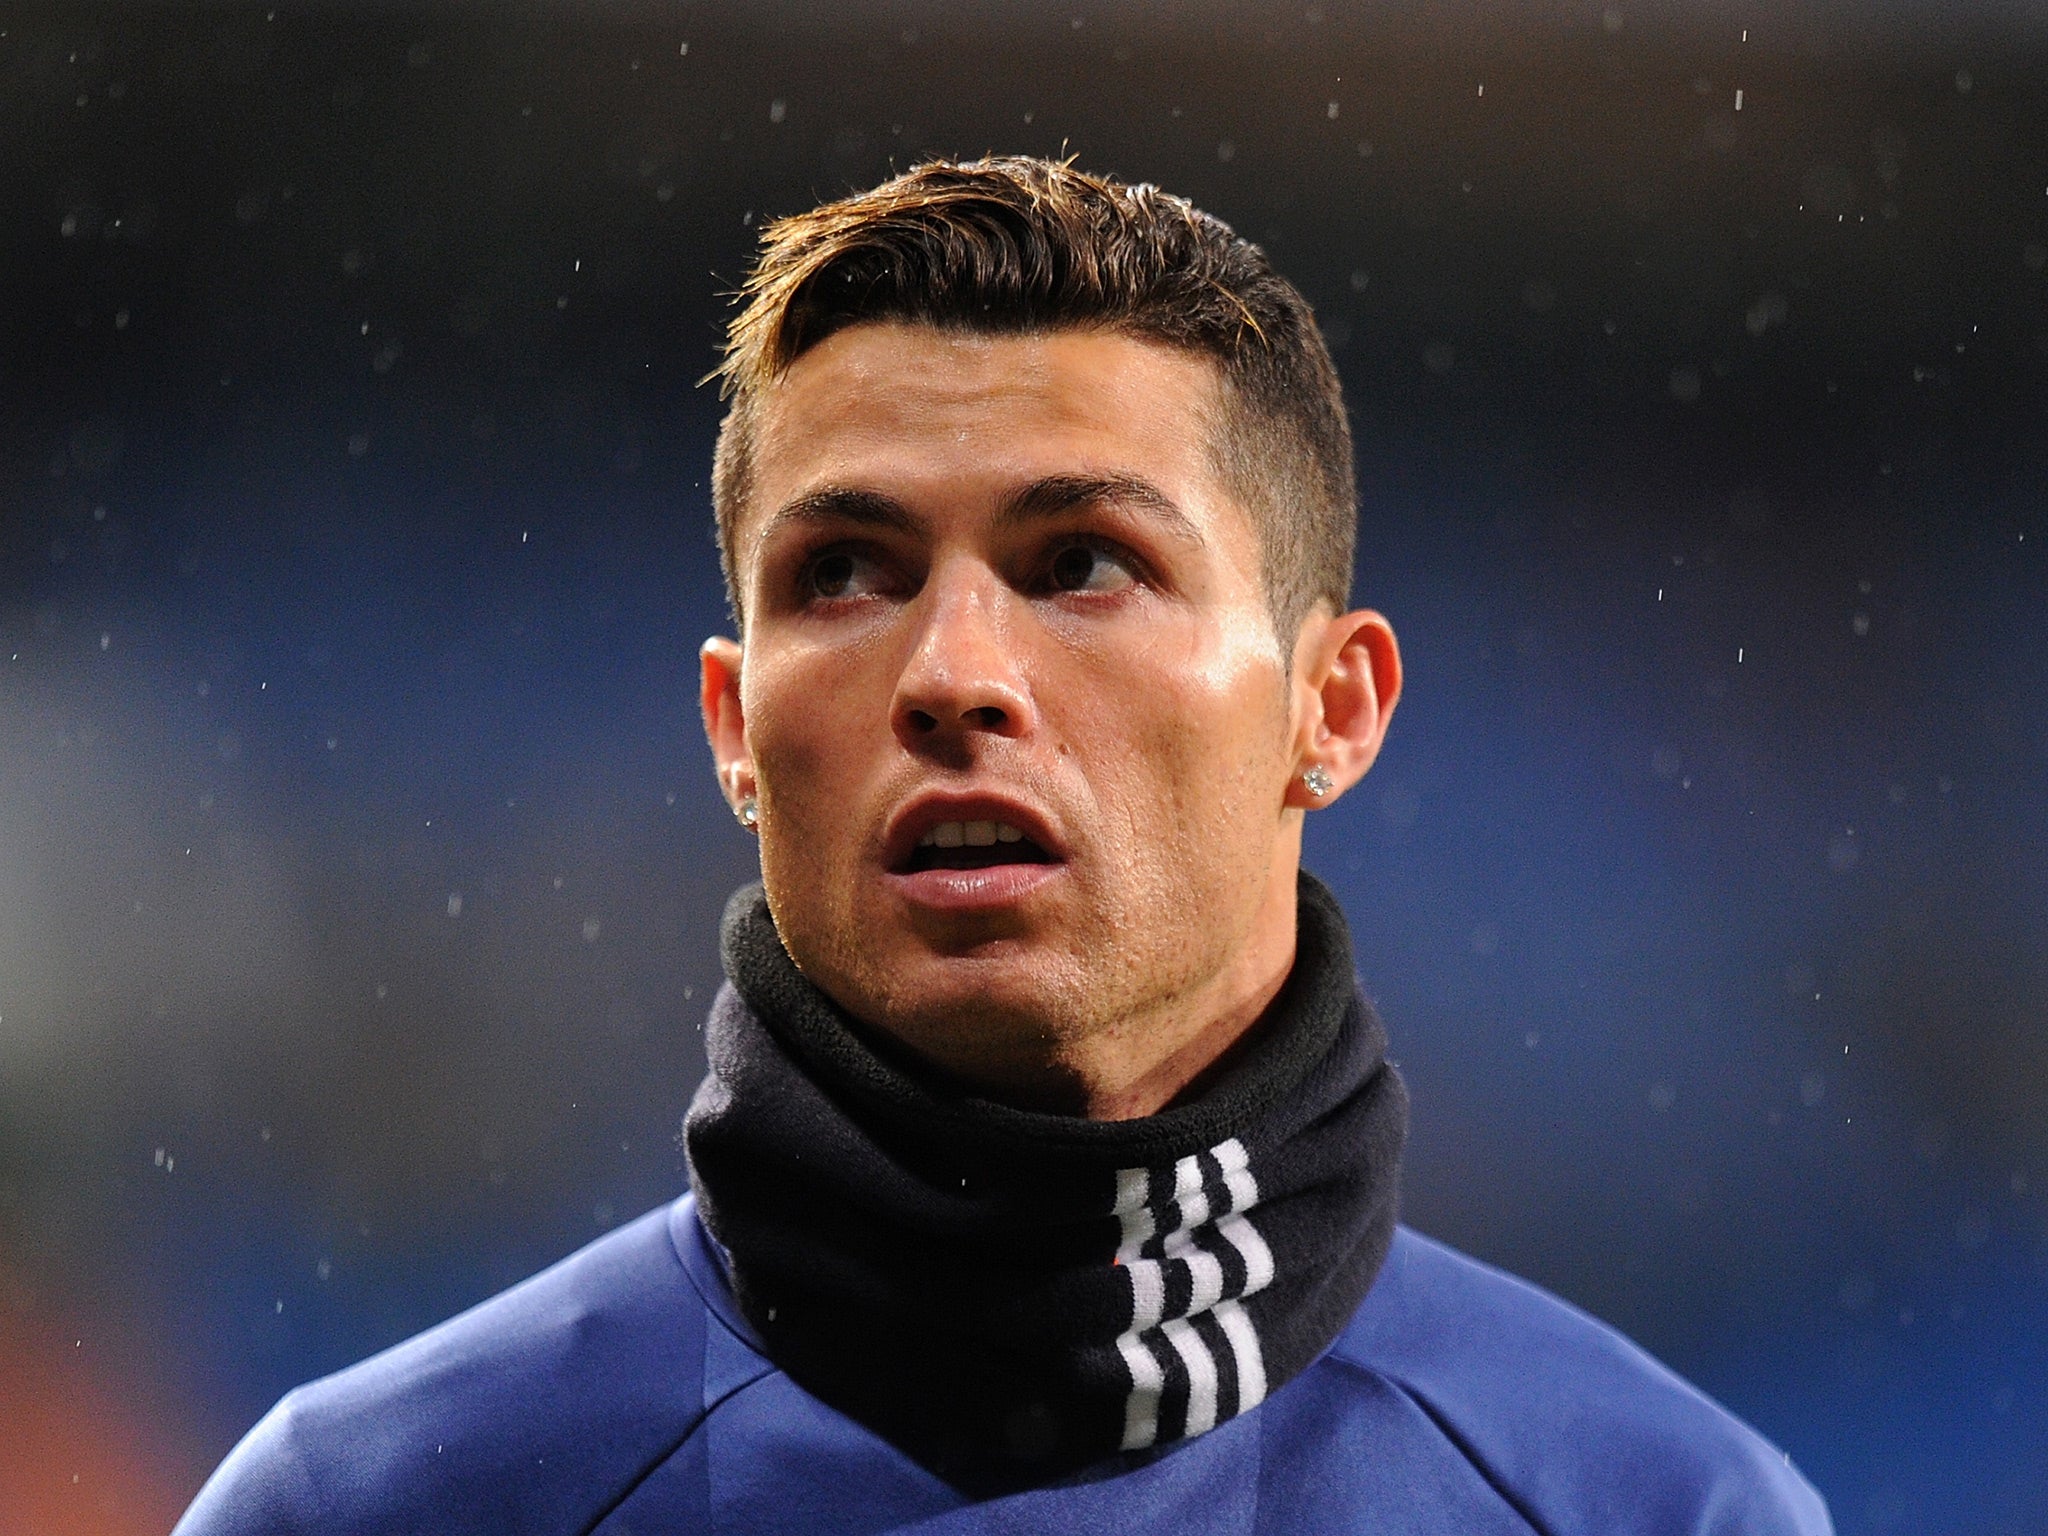 Cristiano Ronaldo was named the world's most charitable athlete in 2015